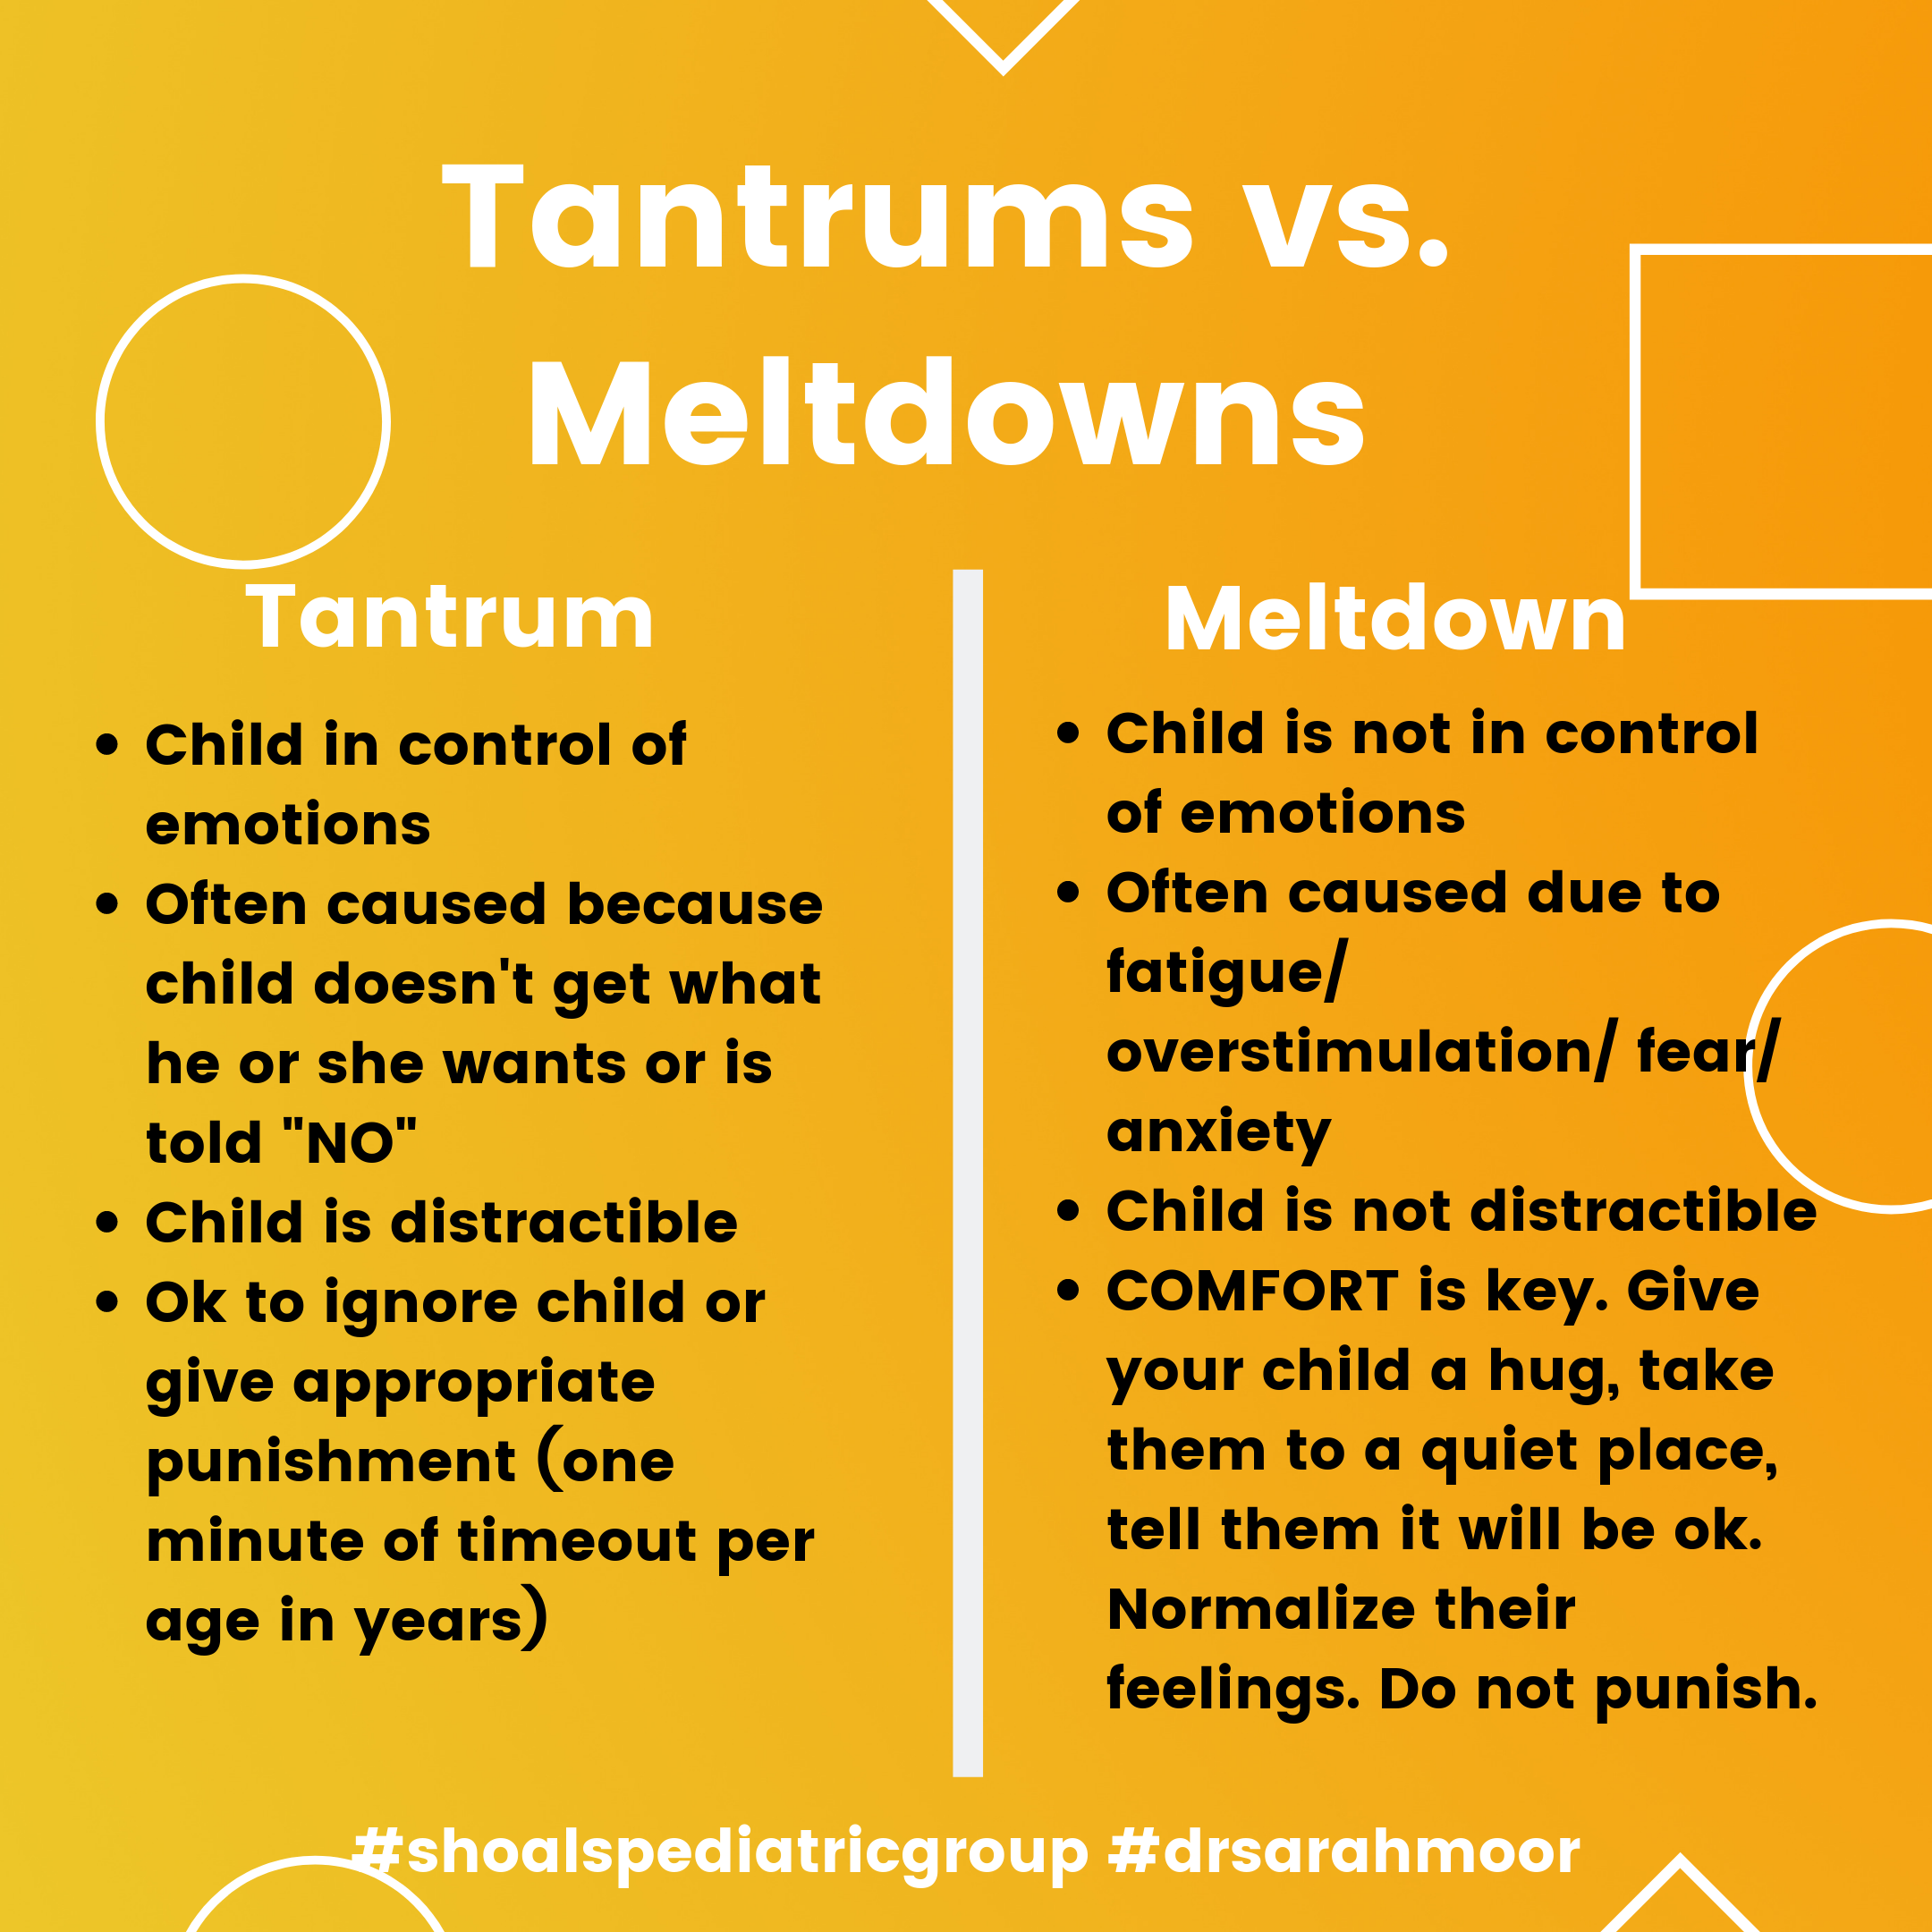 How to handle tantrums and meltdowns in children? 2